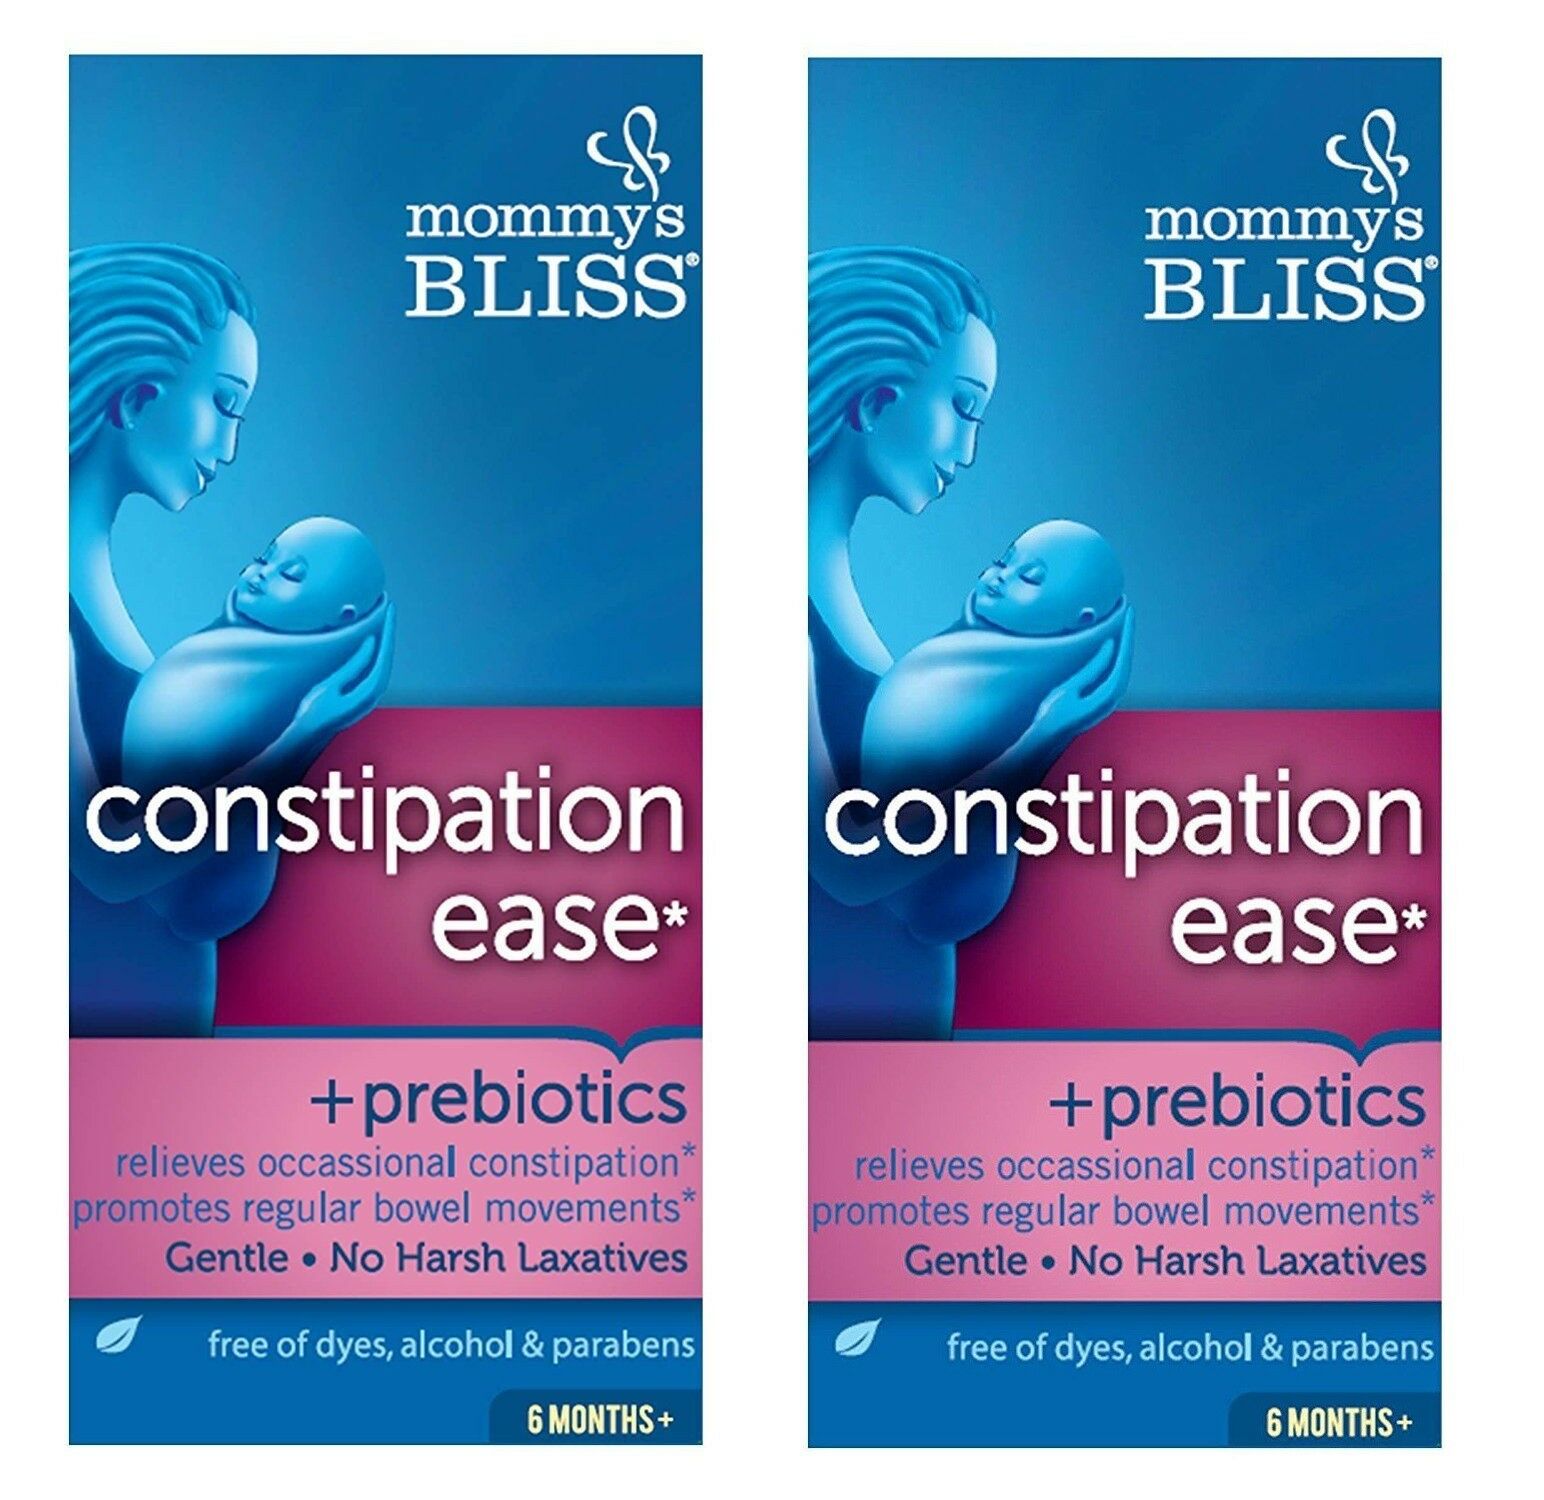 Mommy’s Bliss Constipation Ease